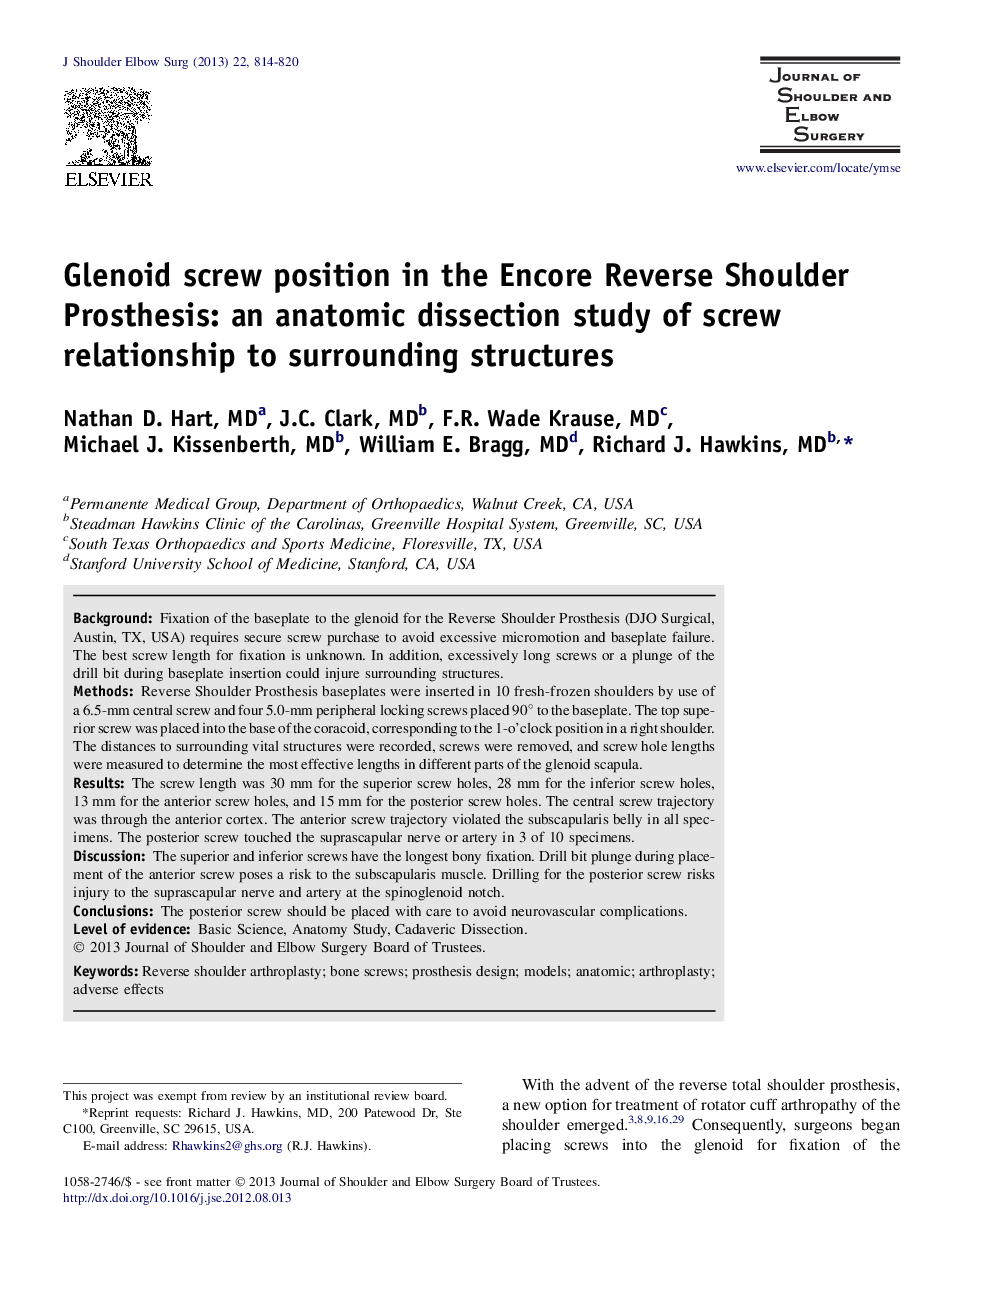 Glenoid screw position in the Encore Reverse Shoulder Prosthesis: an anatomic dissection study of screw relationship to surrounding structures 